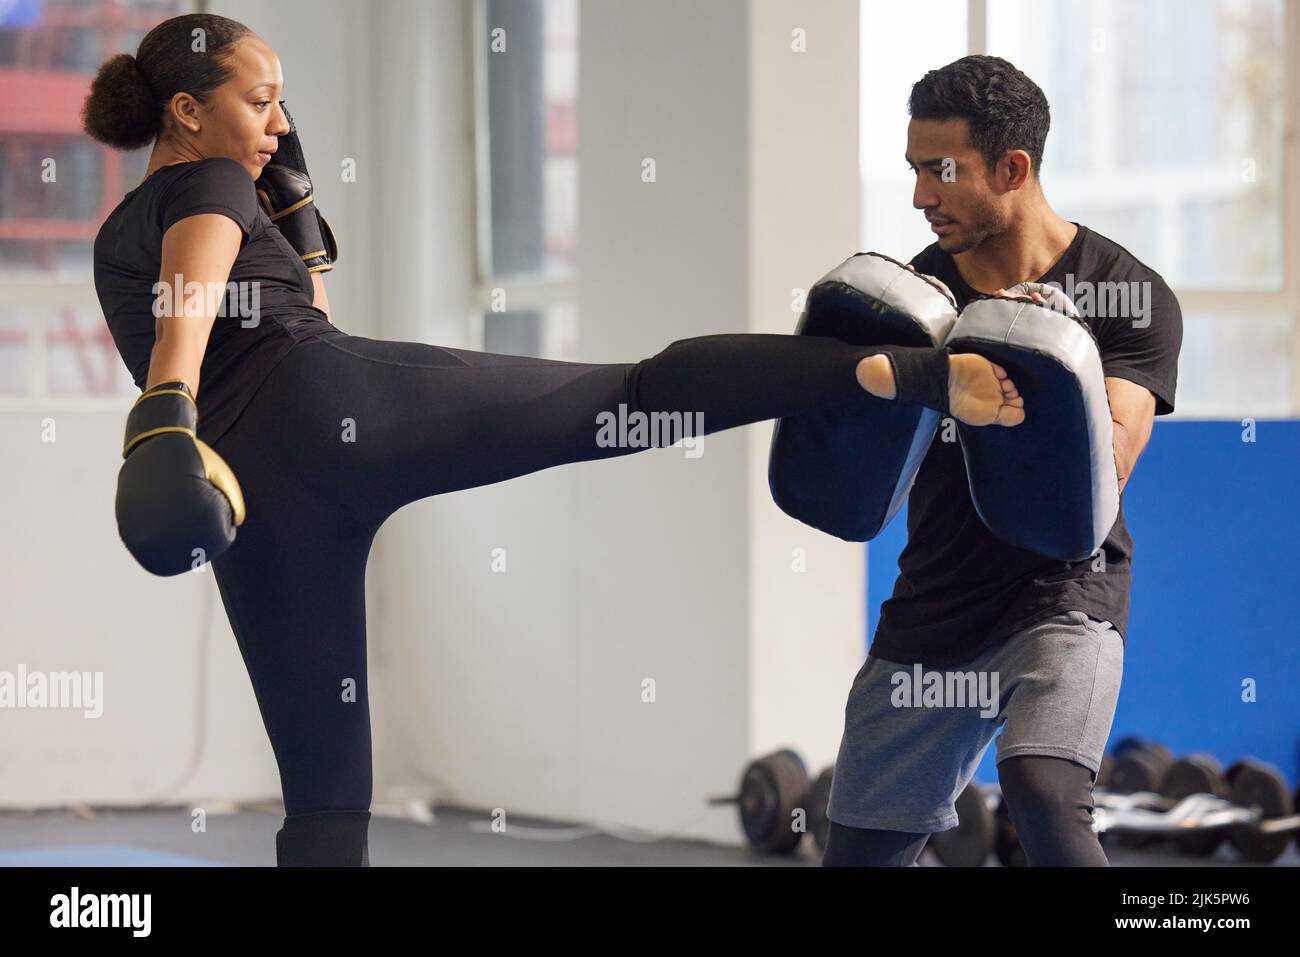 Gaining better balance, power and agility with every kick. a young woman practicing kickboxing with her trainer in a gym. Stock Photo